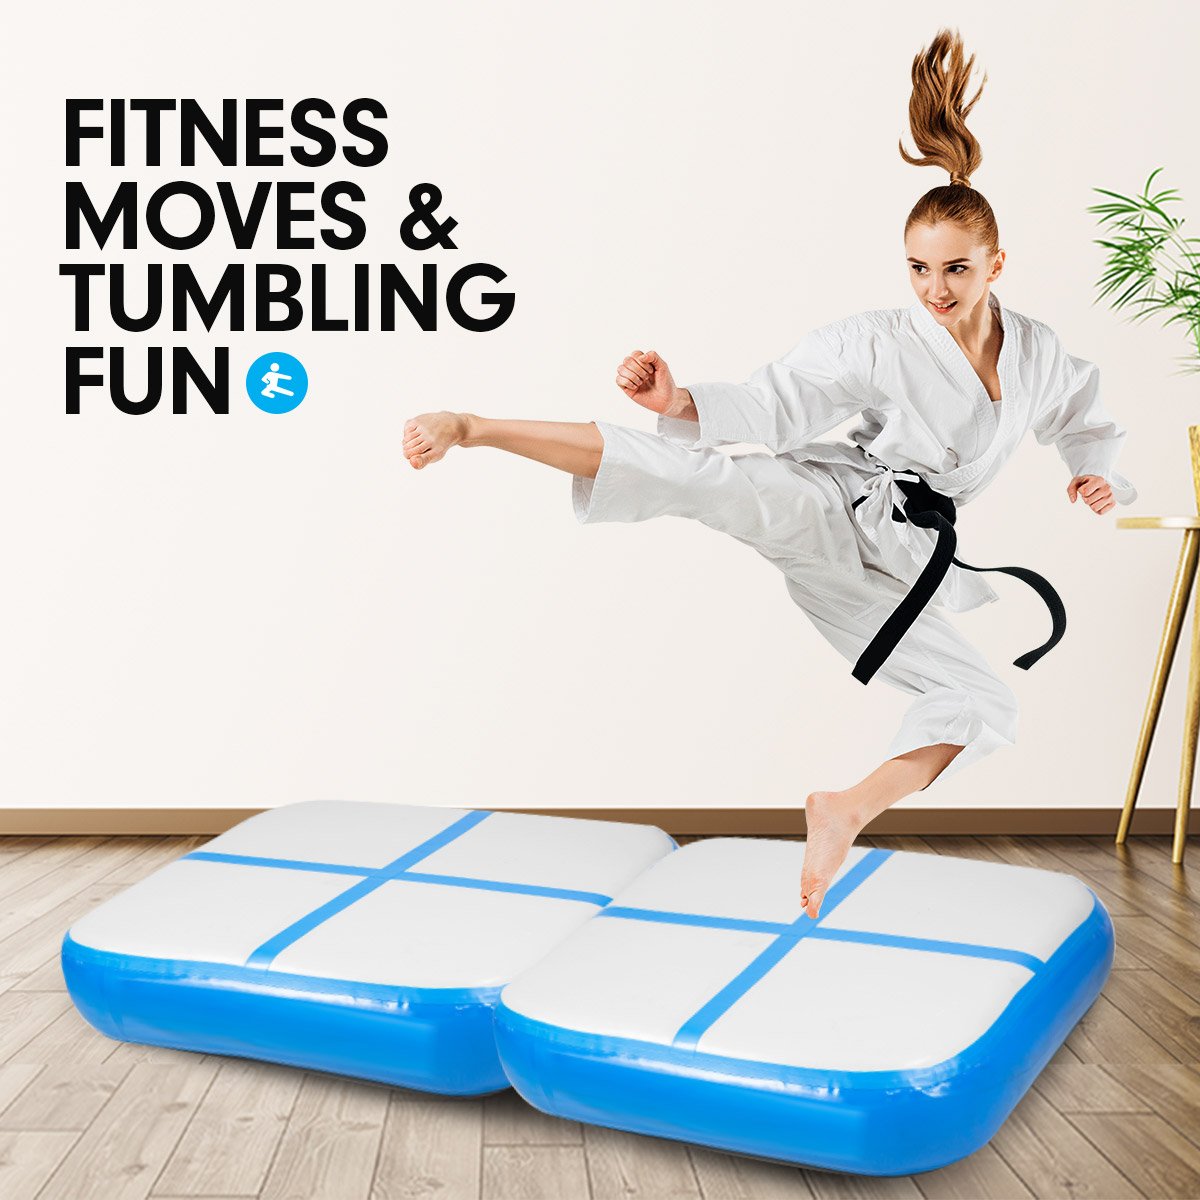 Fatherday-sports and fitness 1m Air Block Inflatable Gymnastics Tumbling Mat with Pump - Blue